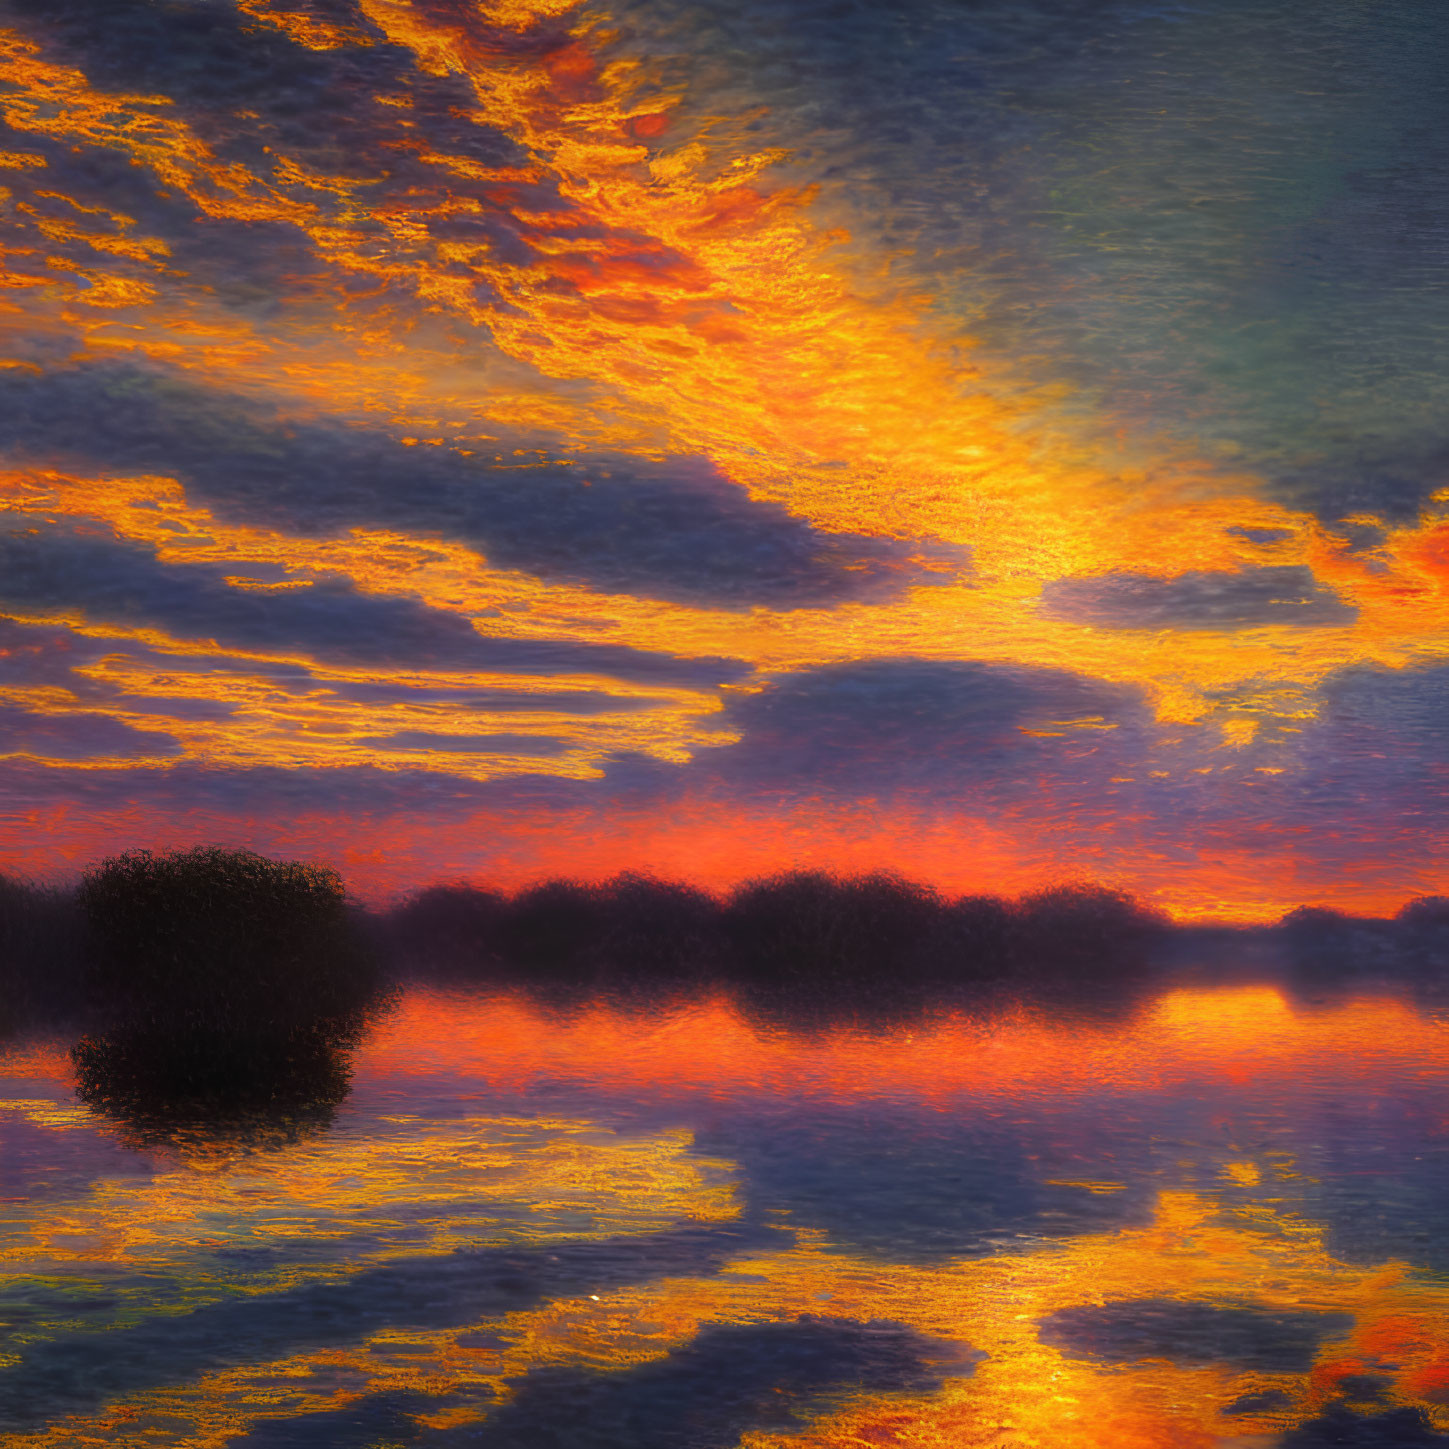 Vivid sunset with fiery clouds reflected in tranquil water